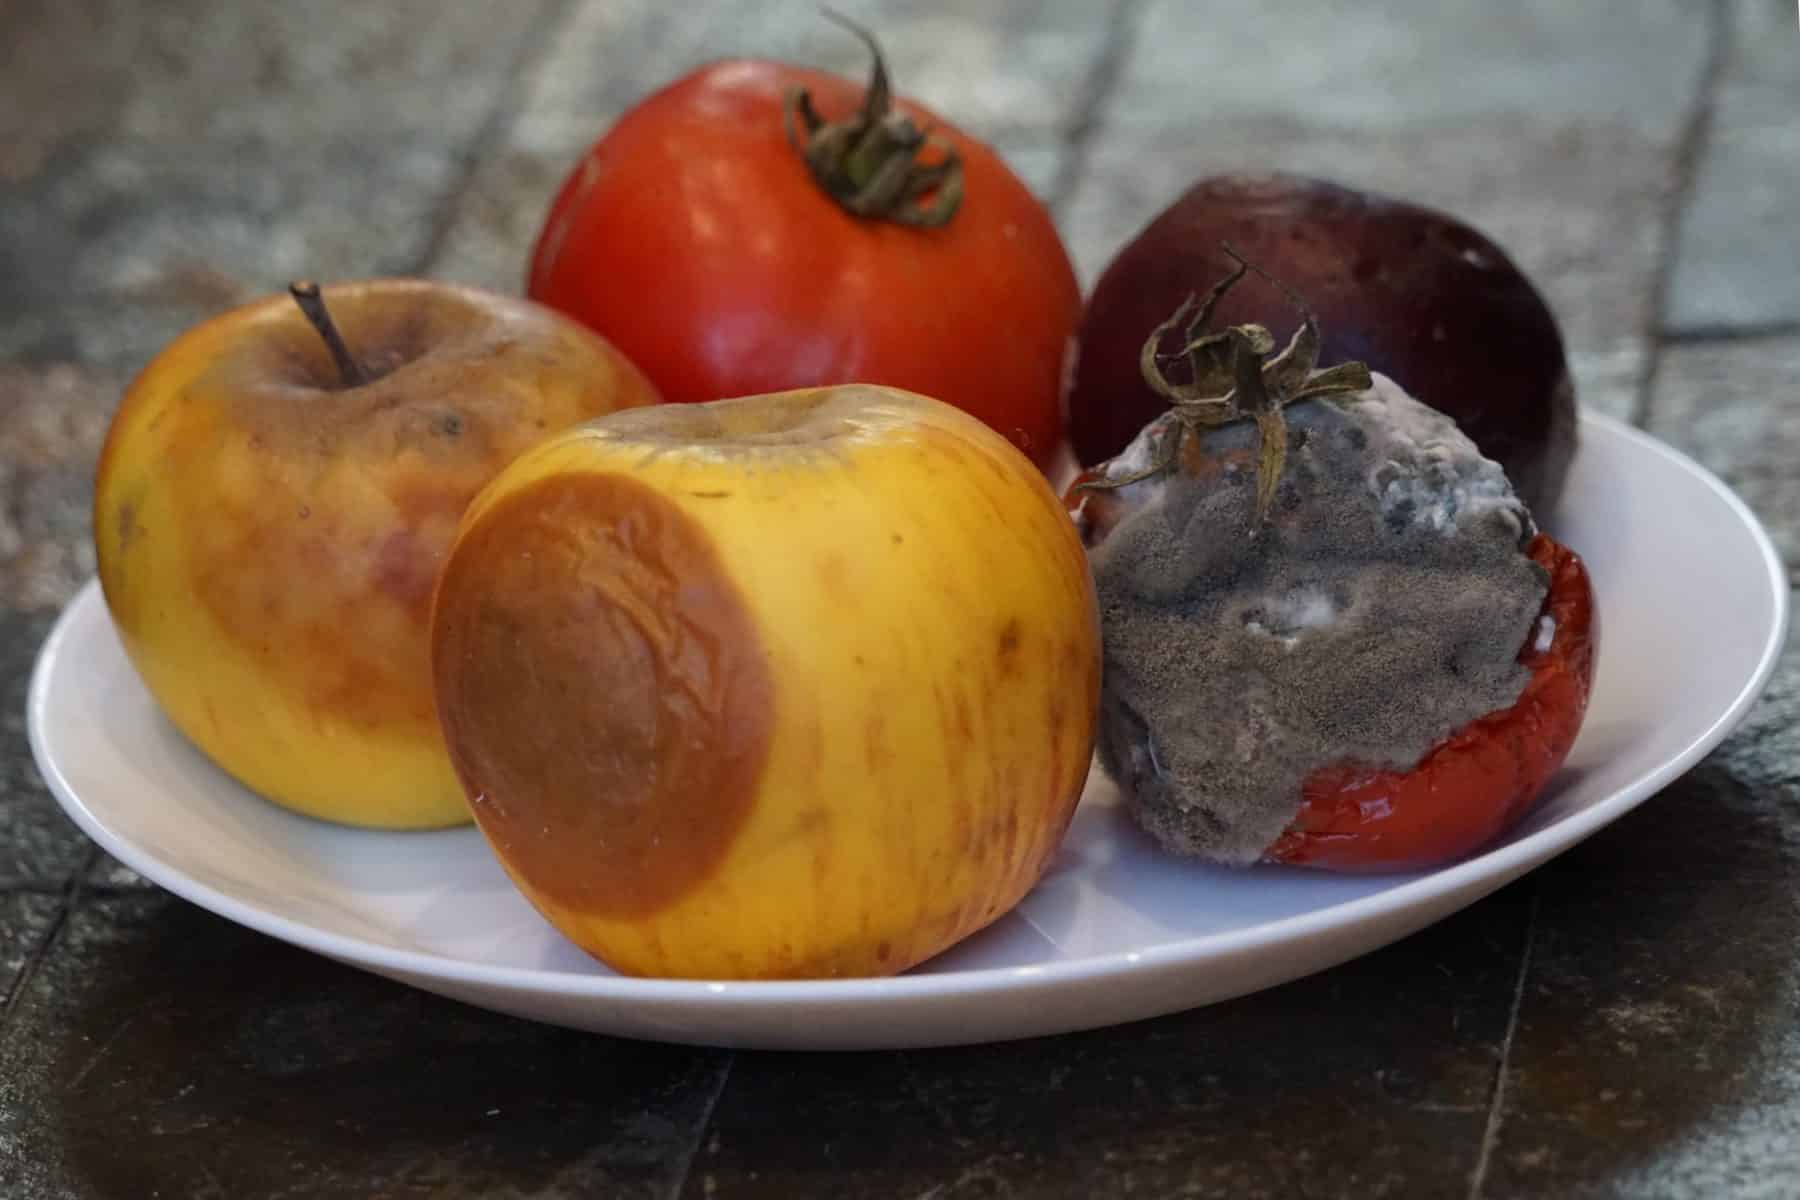 A plate with molding food like apples, prunes and tomato.